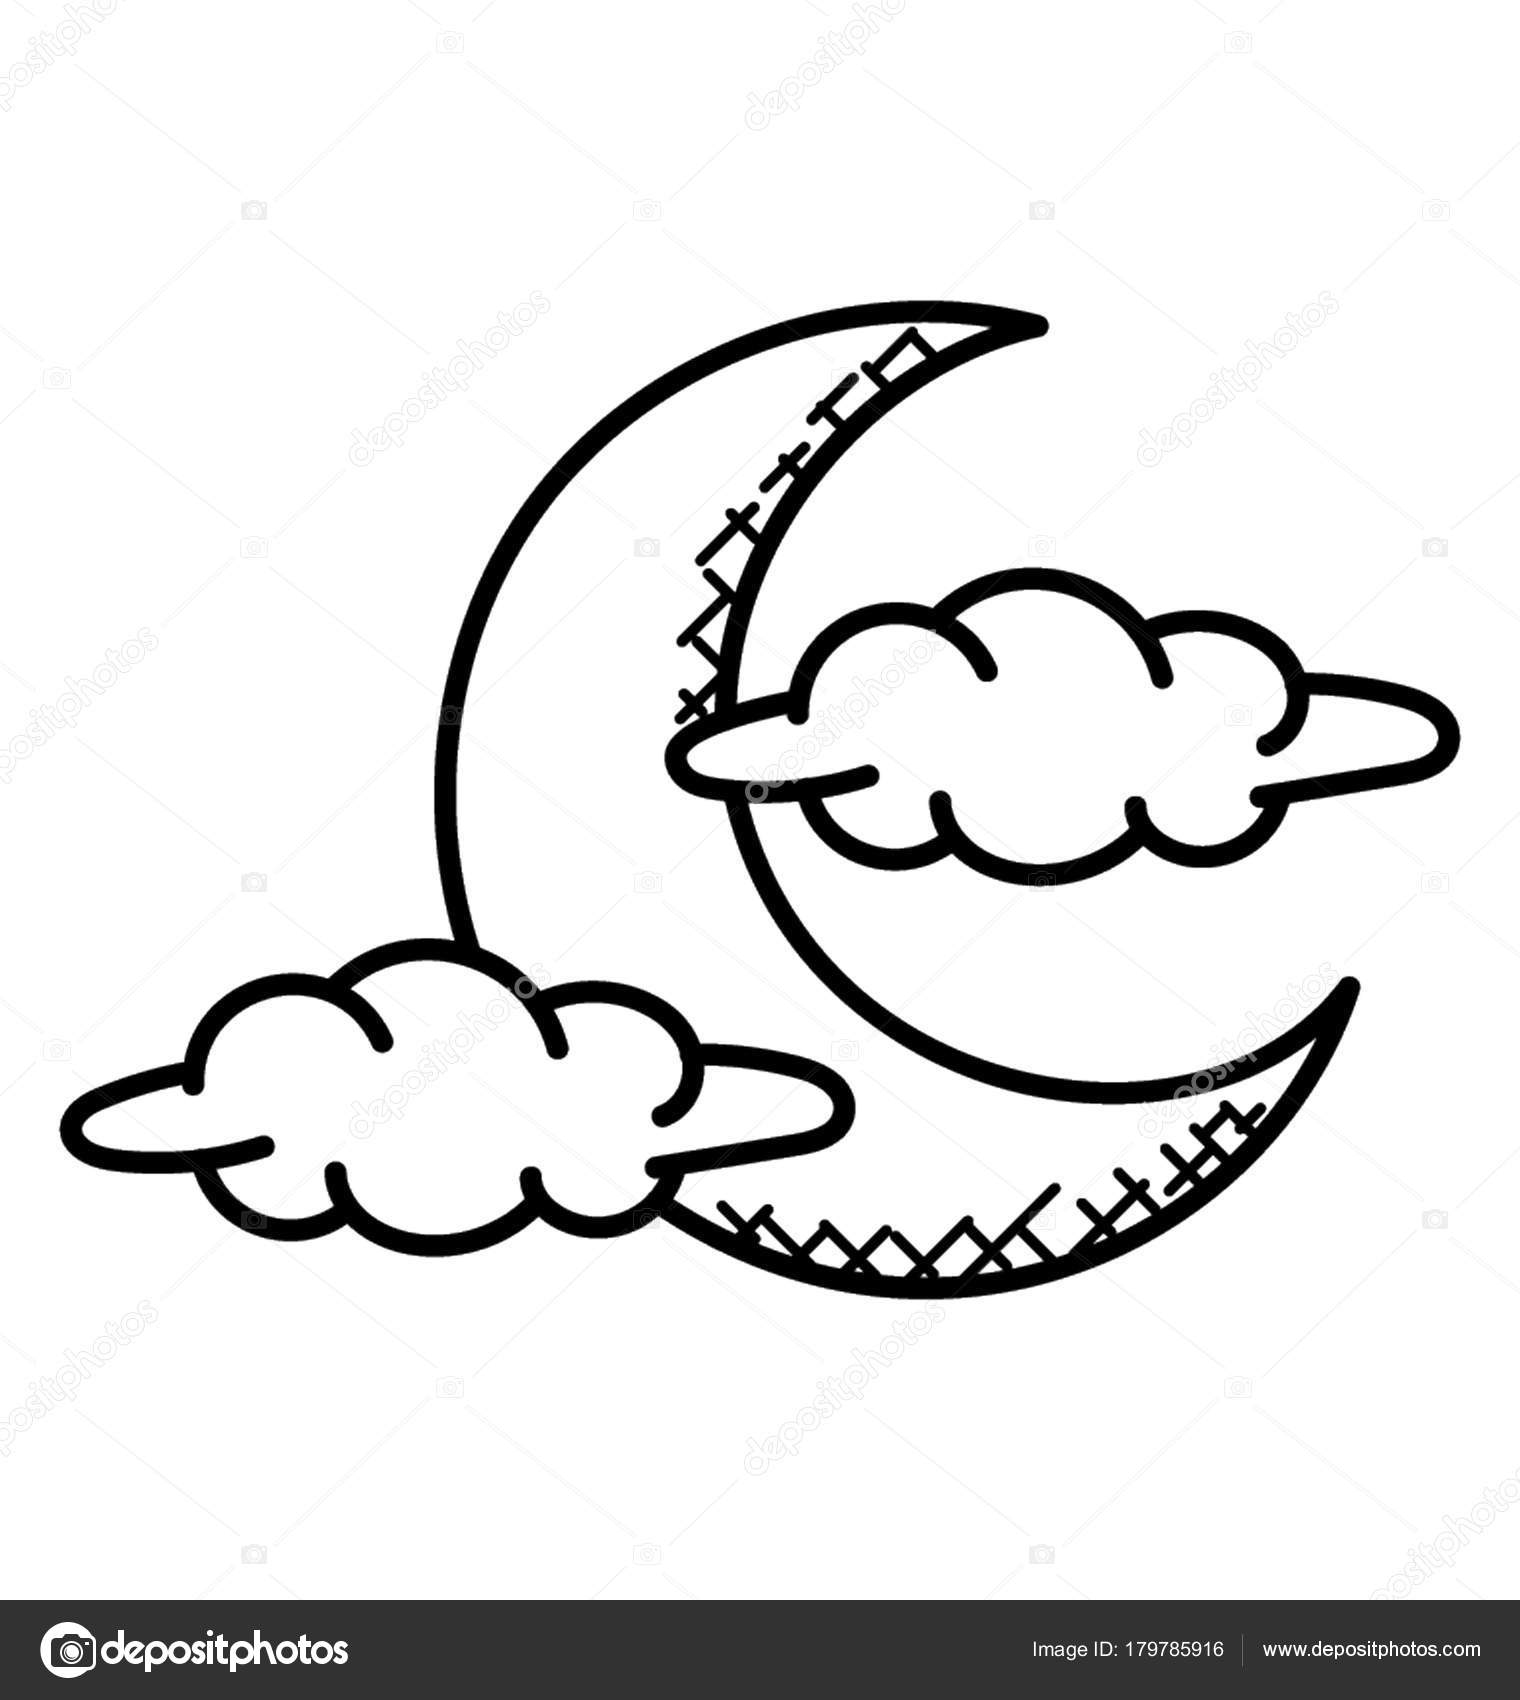 Crescent Moon Clouds Representing Concept Night Sky Doodle